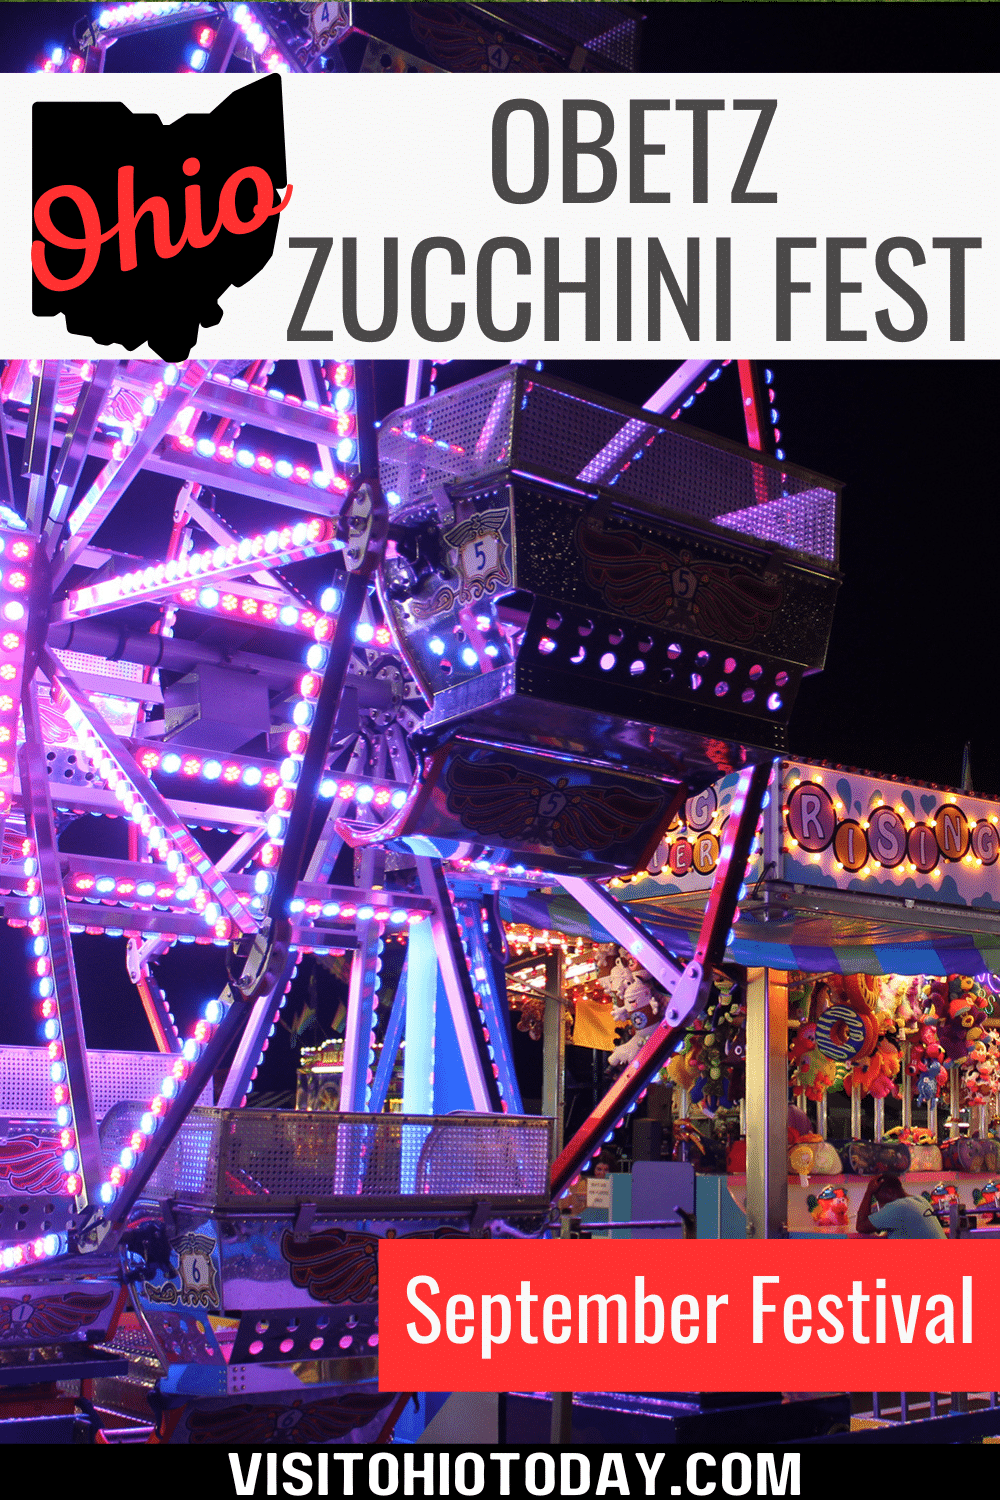 The Obetz ZucchiniFest is an annual event held in early September in the village of Obetz, Ohio, that celebrates everything zucchini!